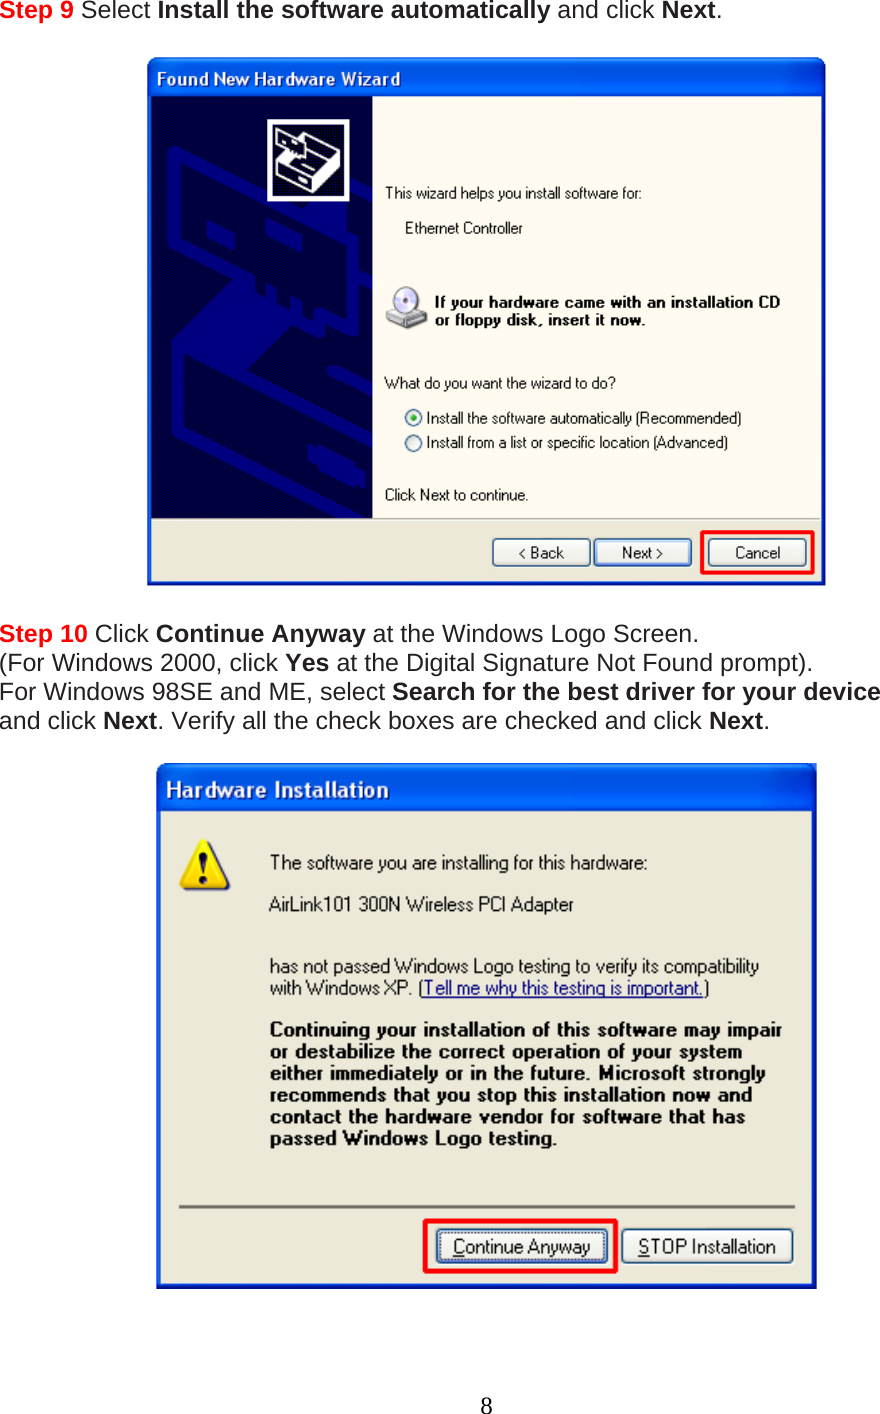 8 Step 9 Select Install the software automatically and click Next.    Step 10 Click Continue Anyway at the Windows Logo Screen. (For Windows 2000, click Yes at the Digital Signature Not Found prompt). For Windows 98SE and ME, select Search for the best driver for your device and click Next. Verify all the check boxes are checked and click Next.    